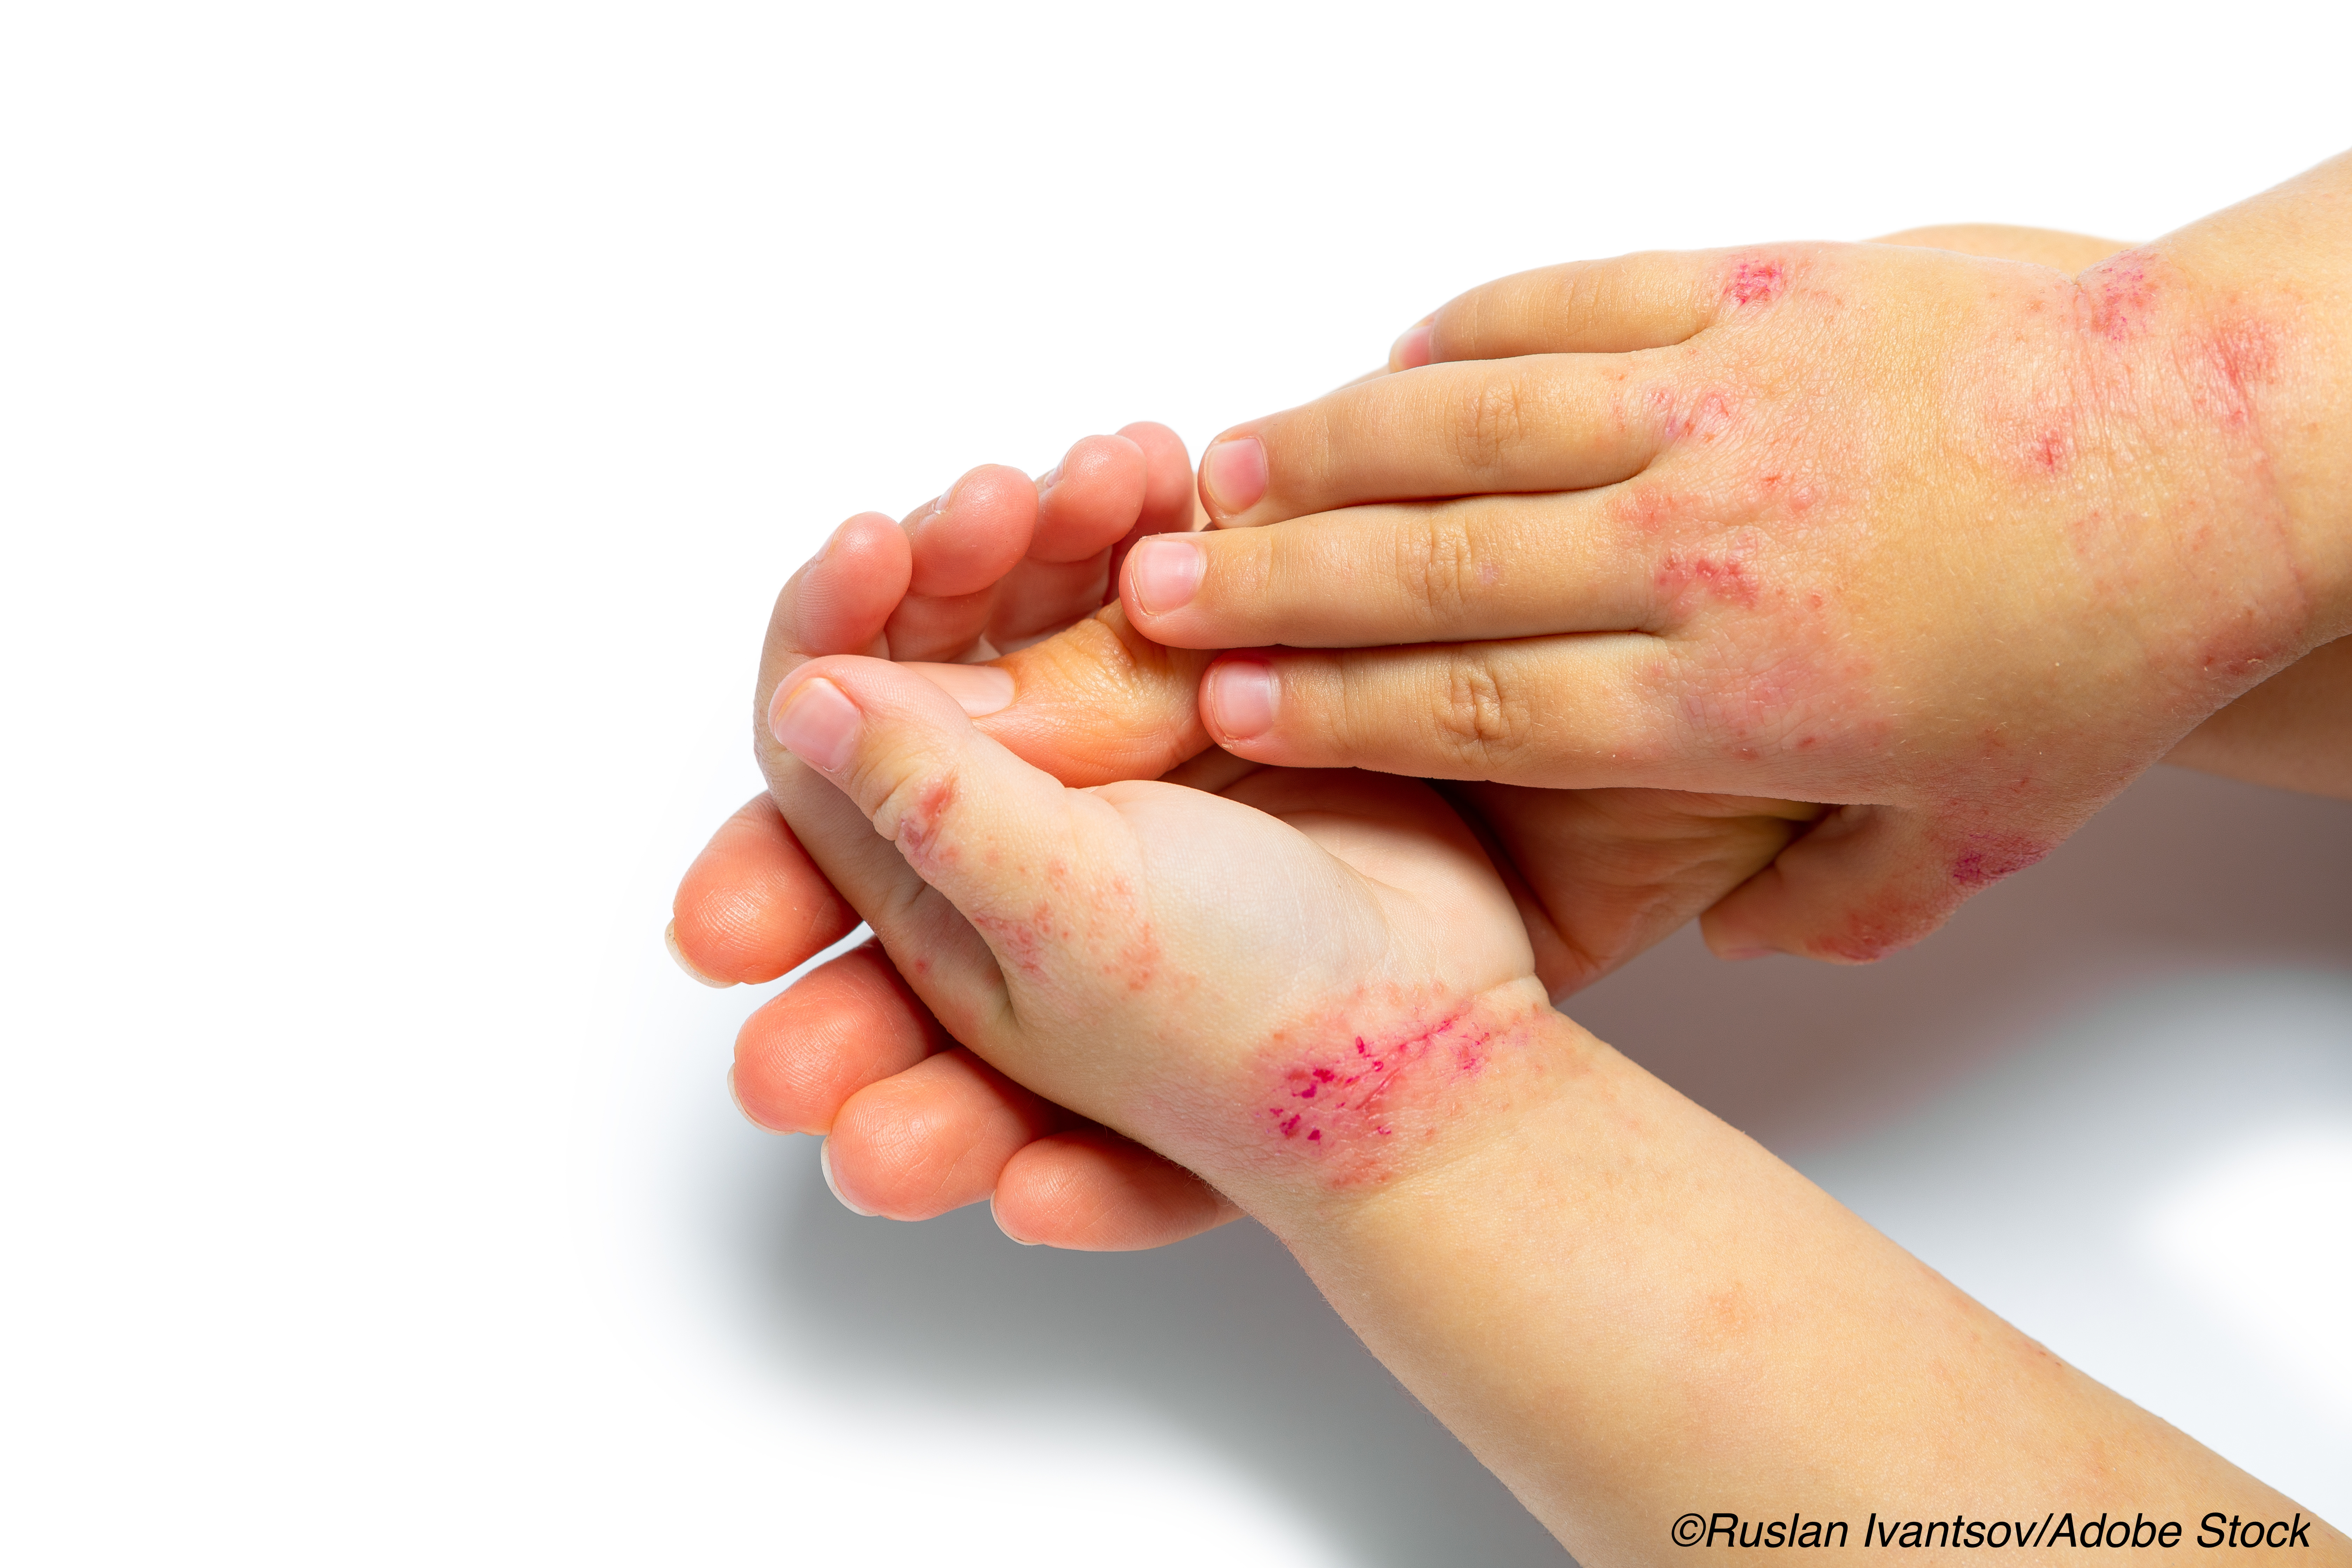 Children with Eczema at Greater Risk for Learning Disabilities